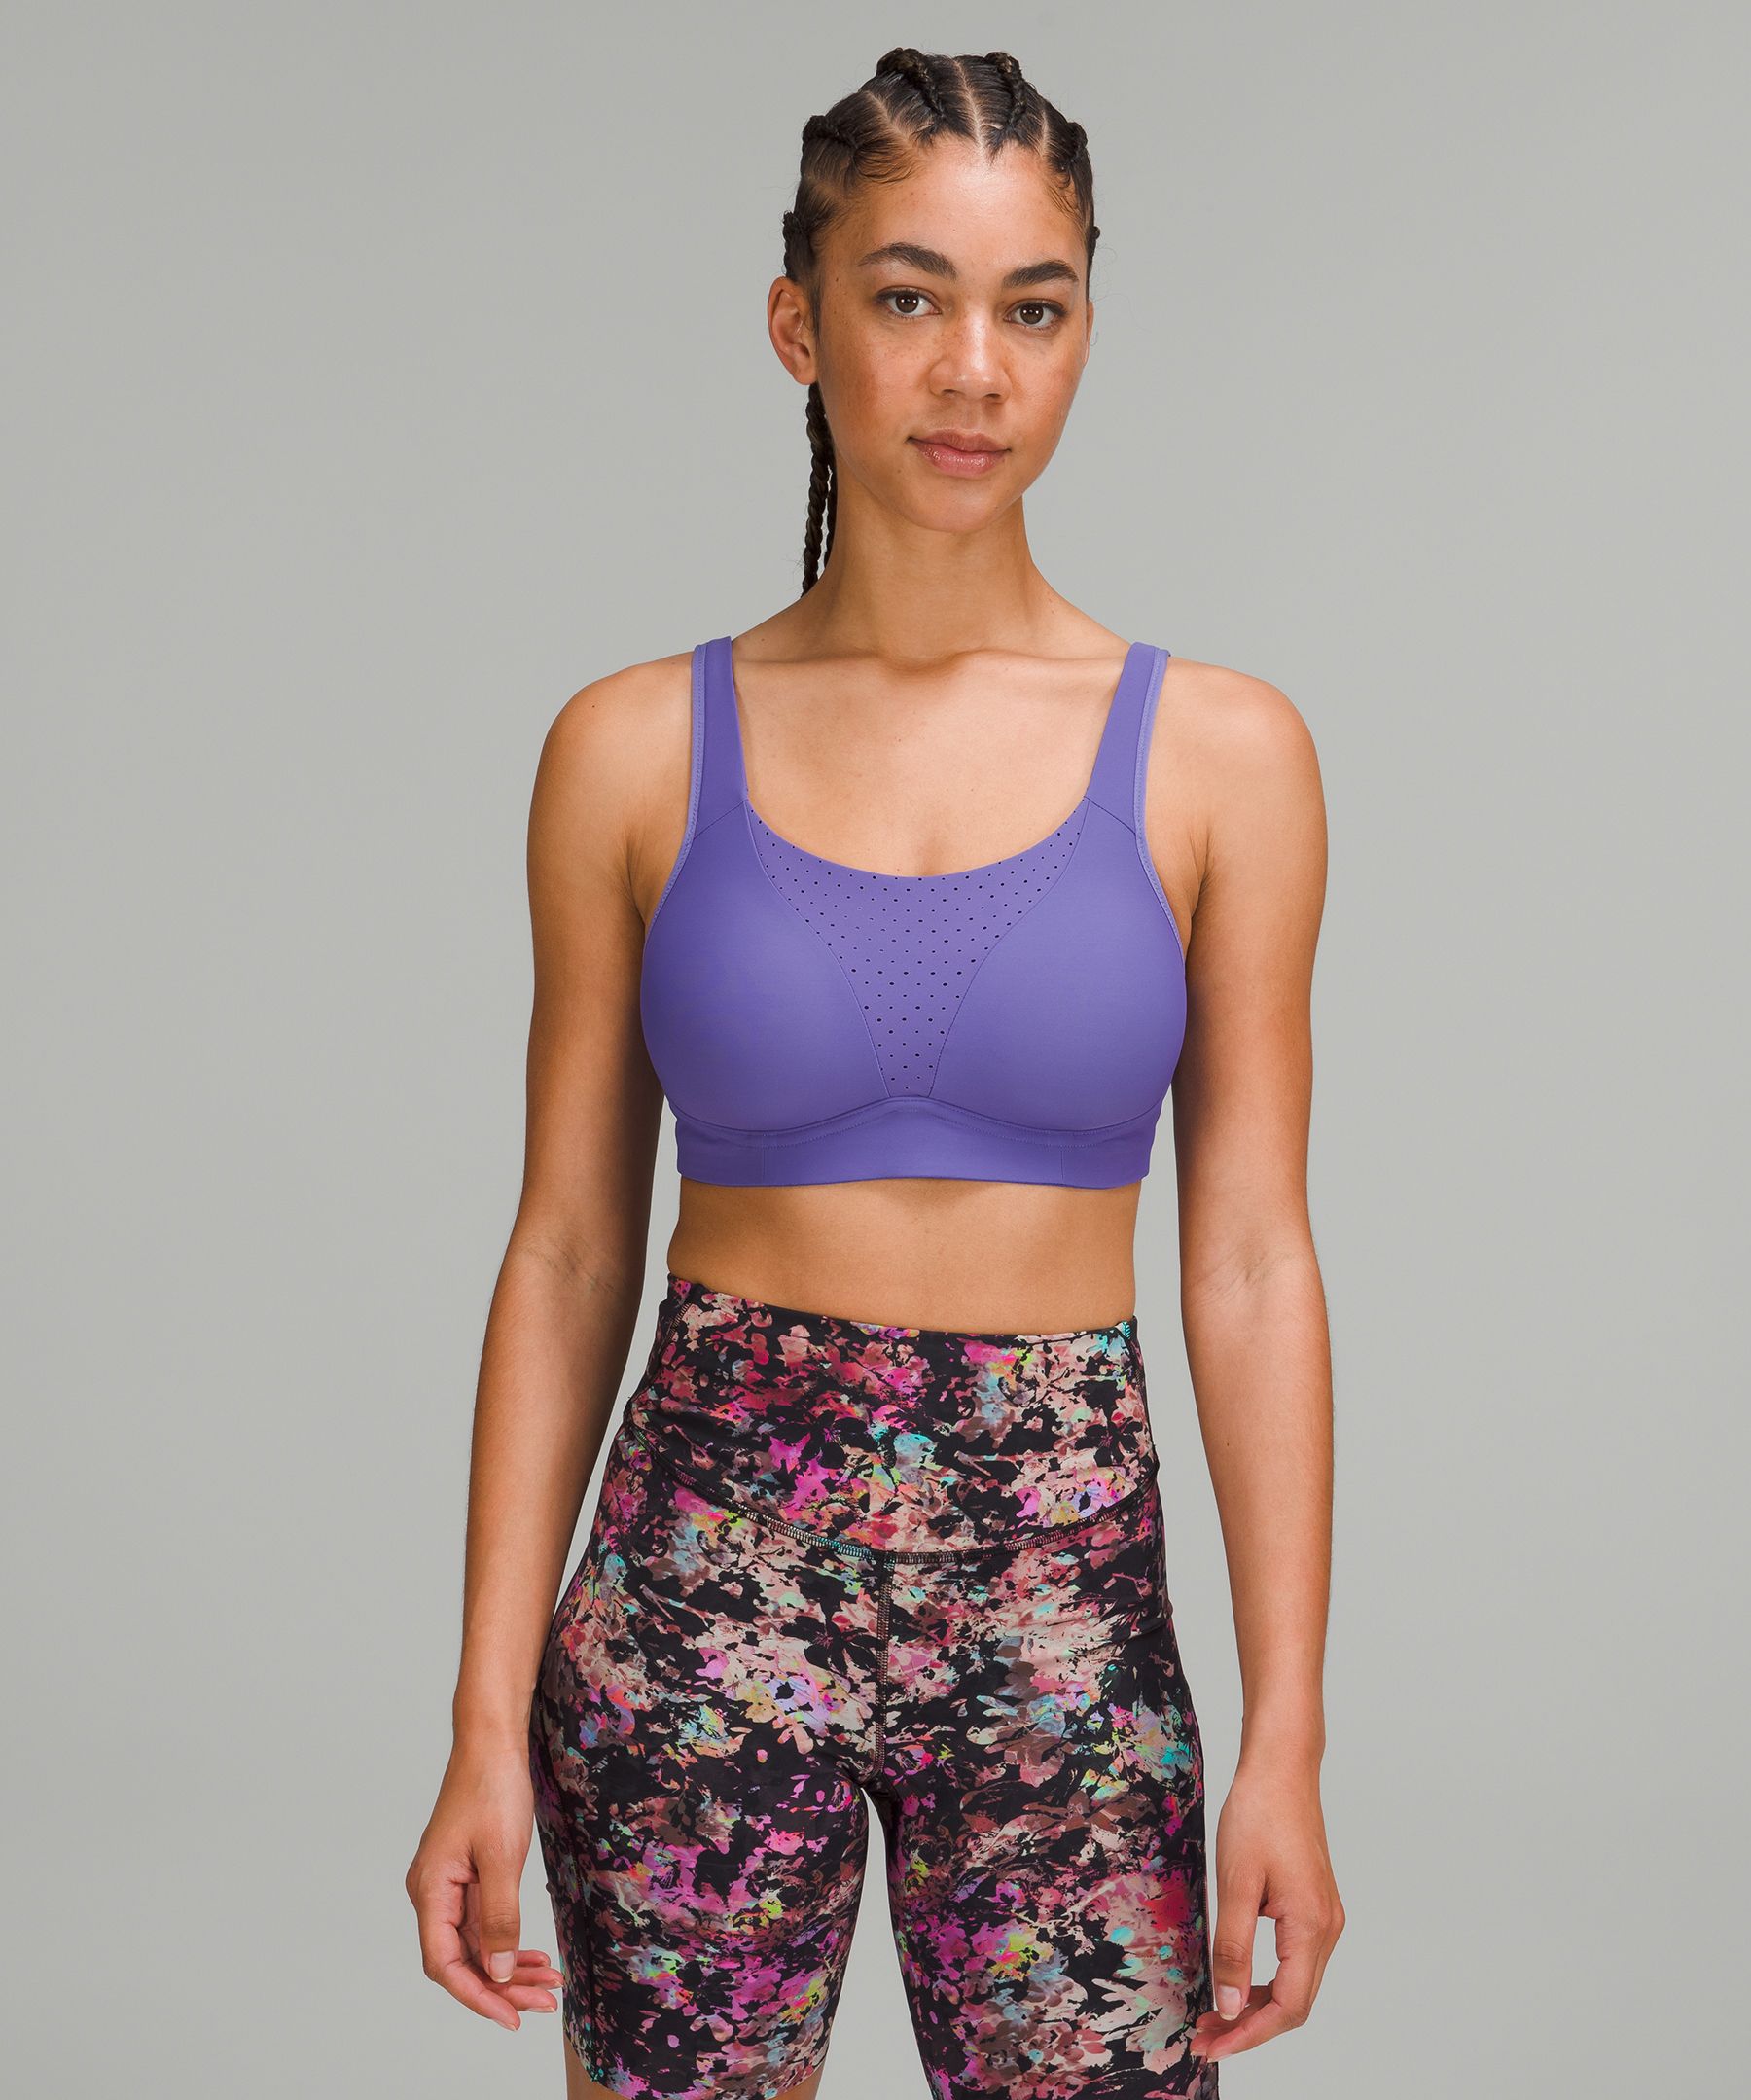 Lululemon Run Times Bra High Support, B-g Cups In Charged Indigo